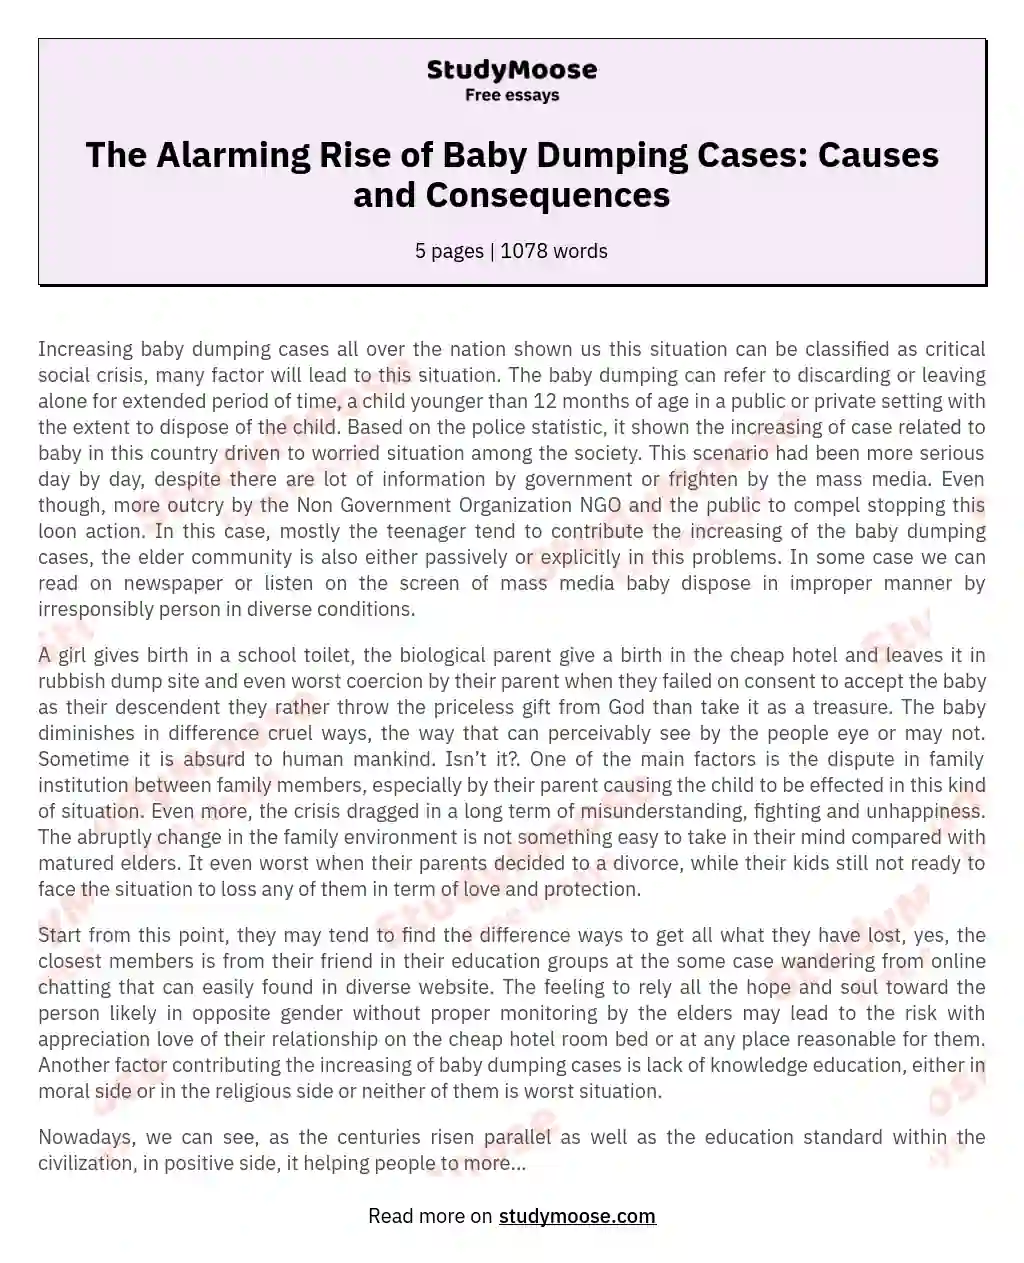 The Alarming Rise of Baby Dumping Cases: Causes and Consequences essay